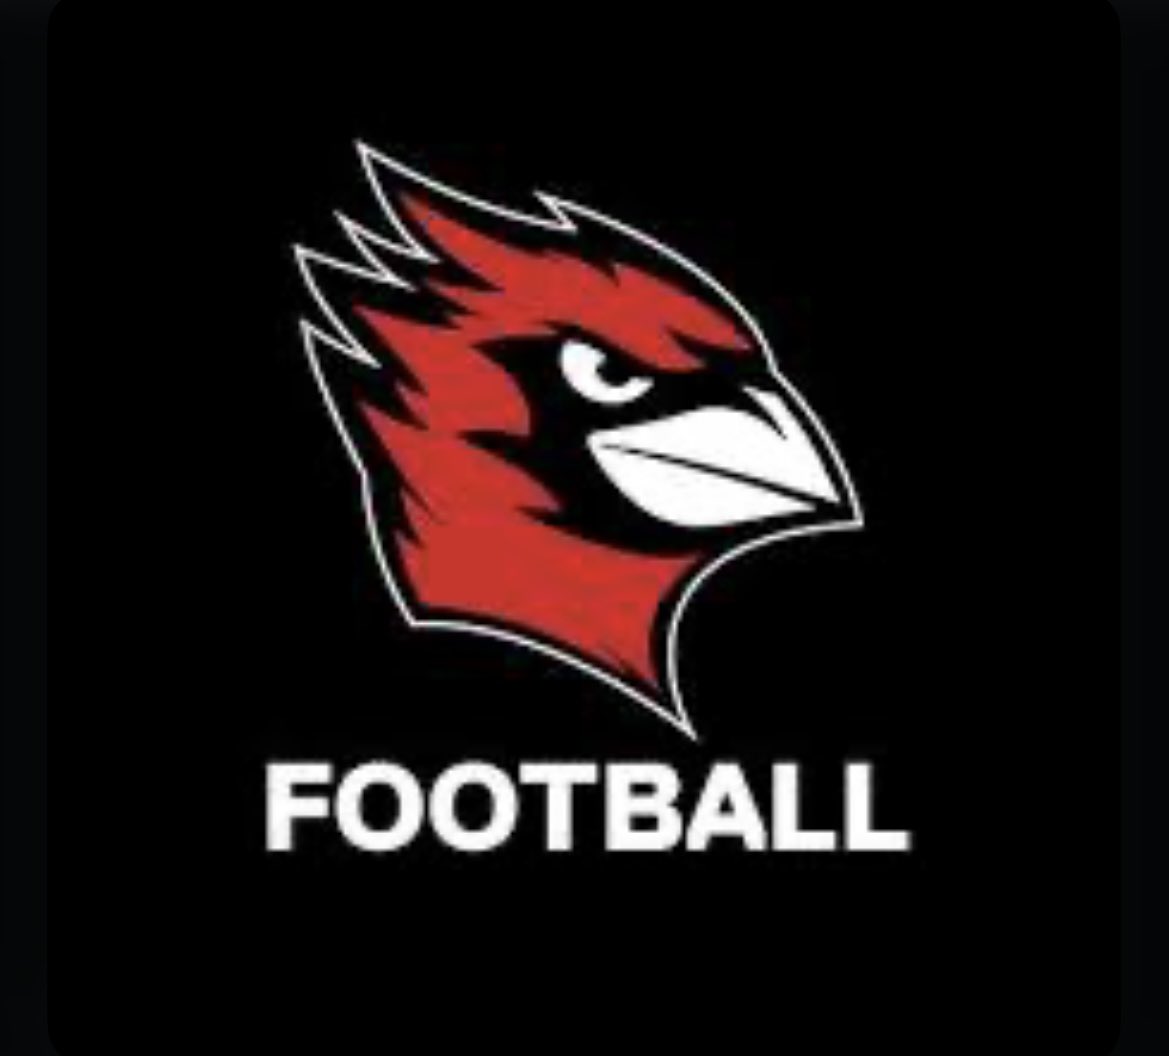 After an amazing call with @CoachDiCenzo I am very excited to announce I have received an offer from @Wes_Football! I am very thankful for this great opportunity. @RidgefieldFball @brendancahill_ #NESCAC